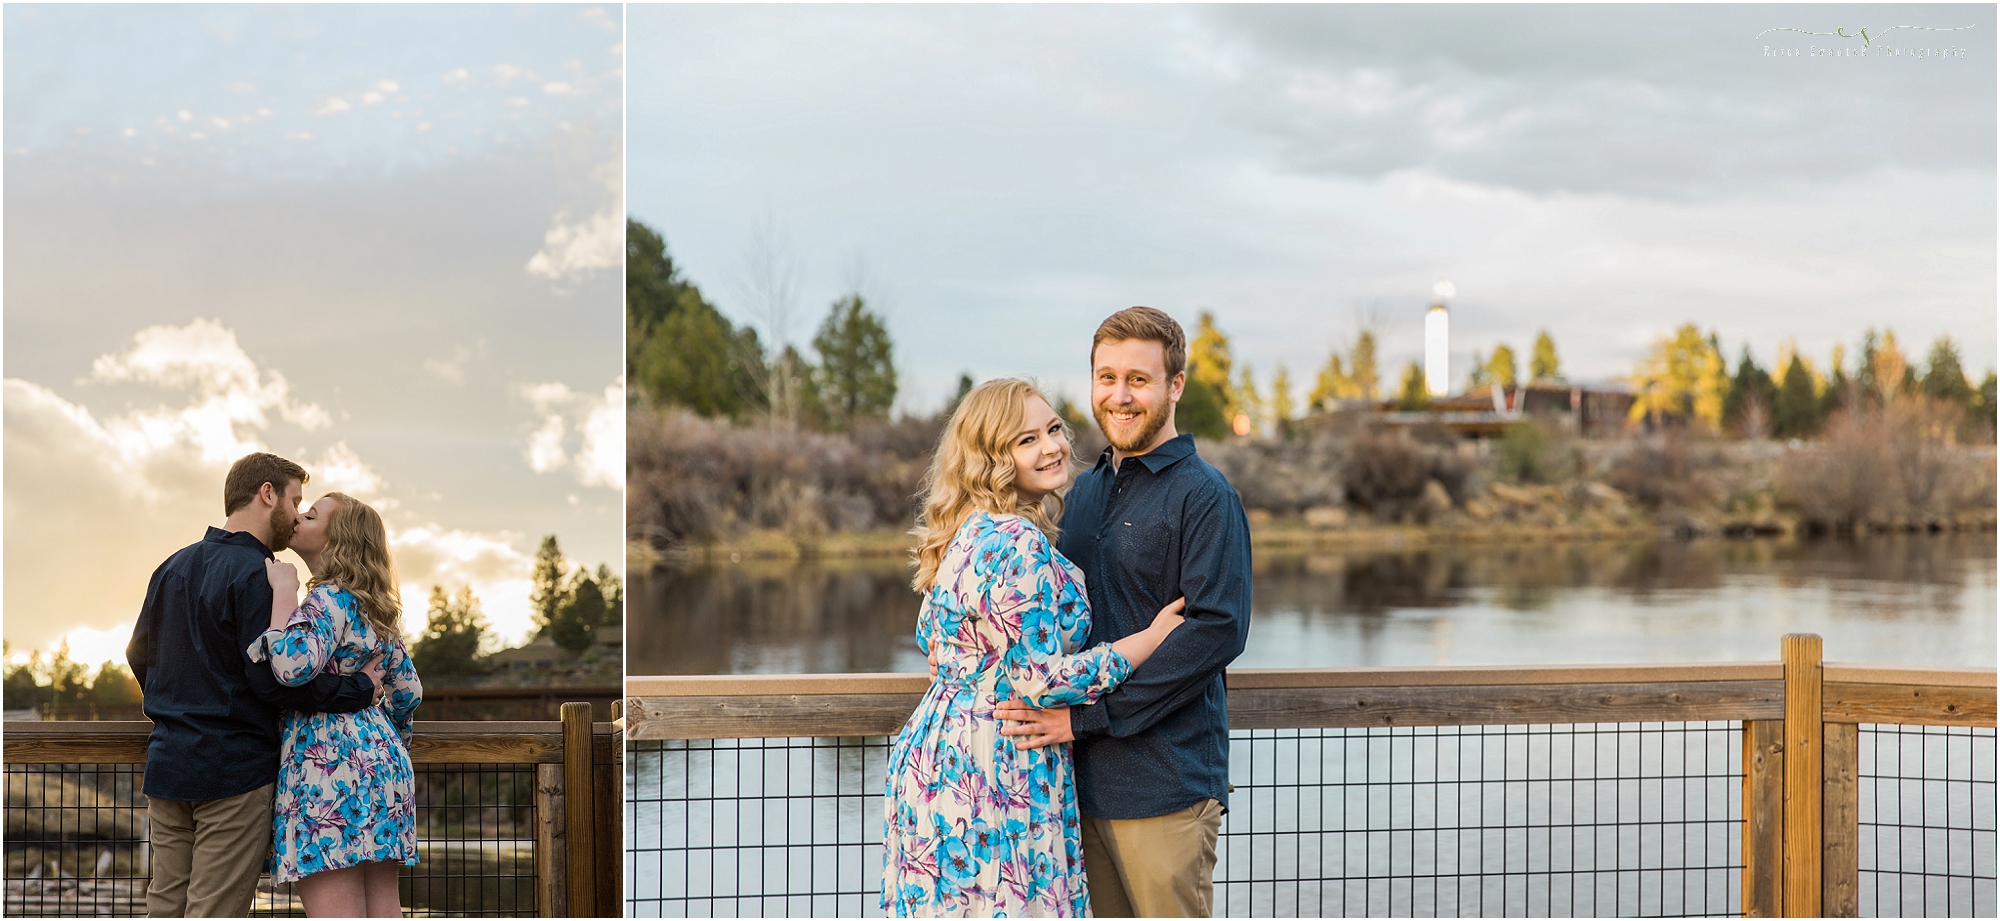 A gorgeous Old Mill District engagement session by Bend Oregon wedding photographer Erica Swantek. 